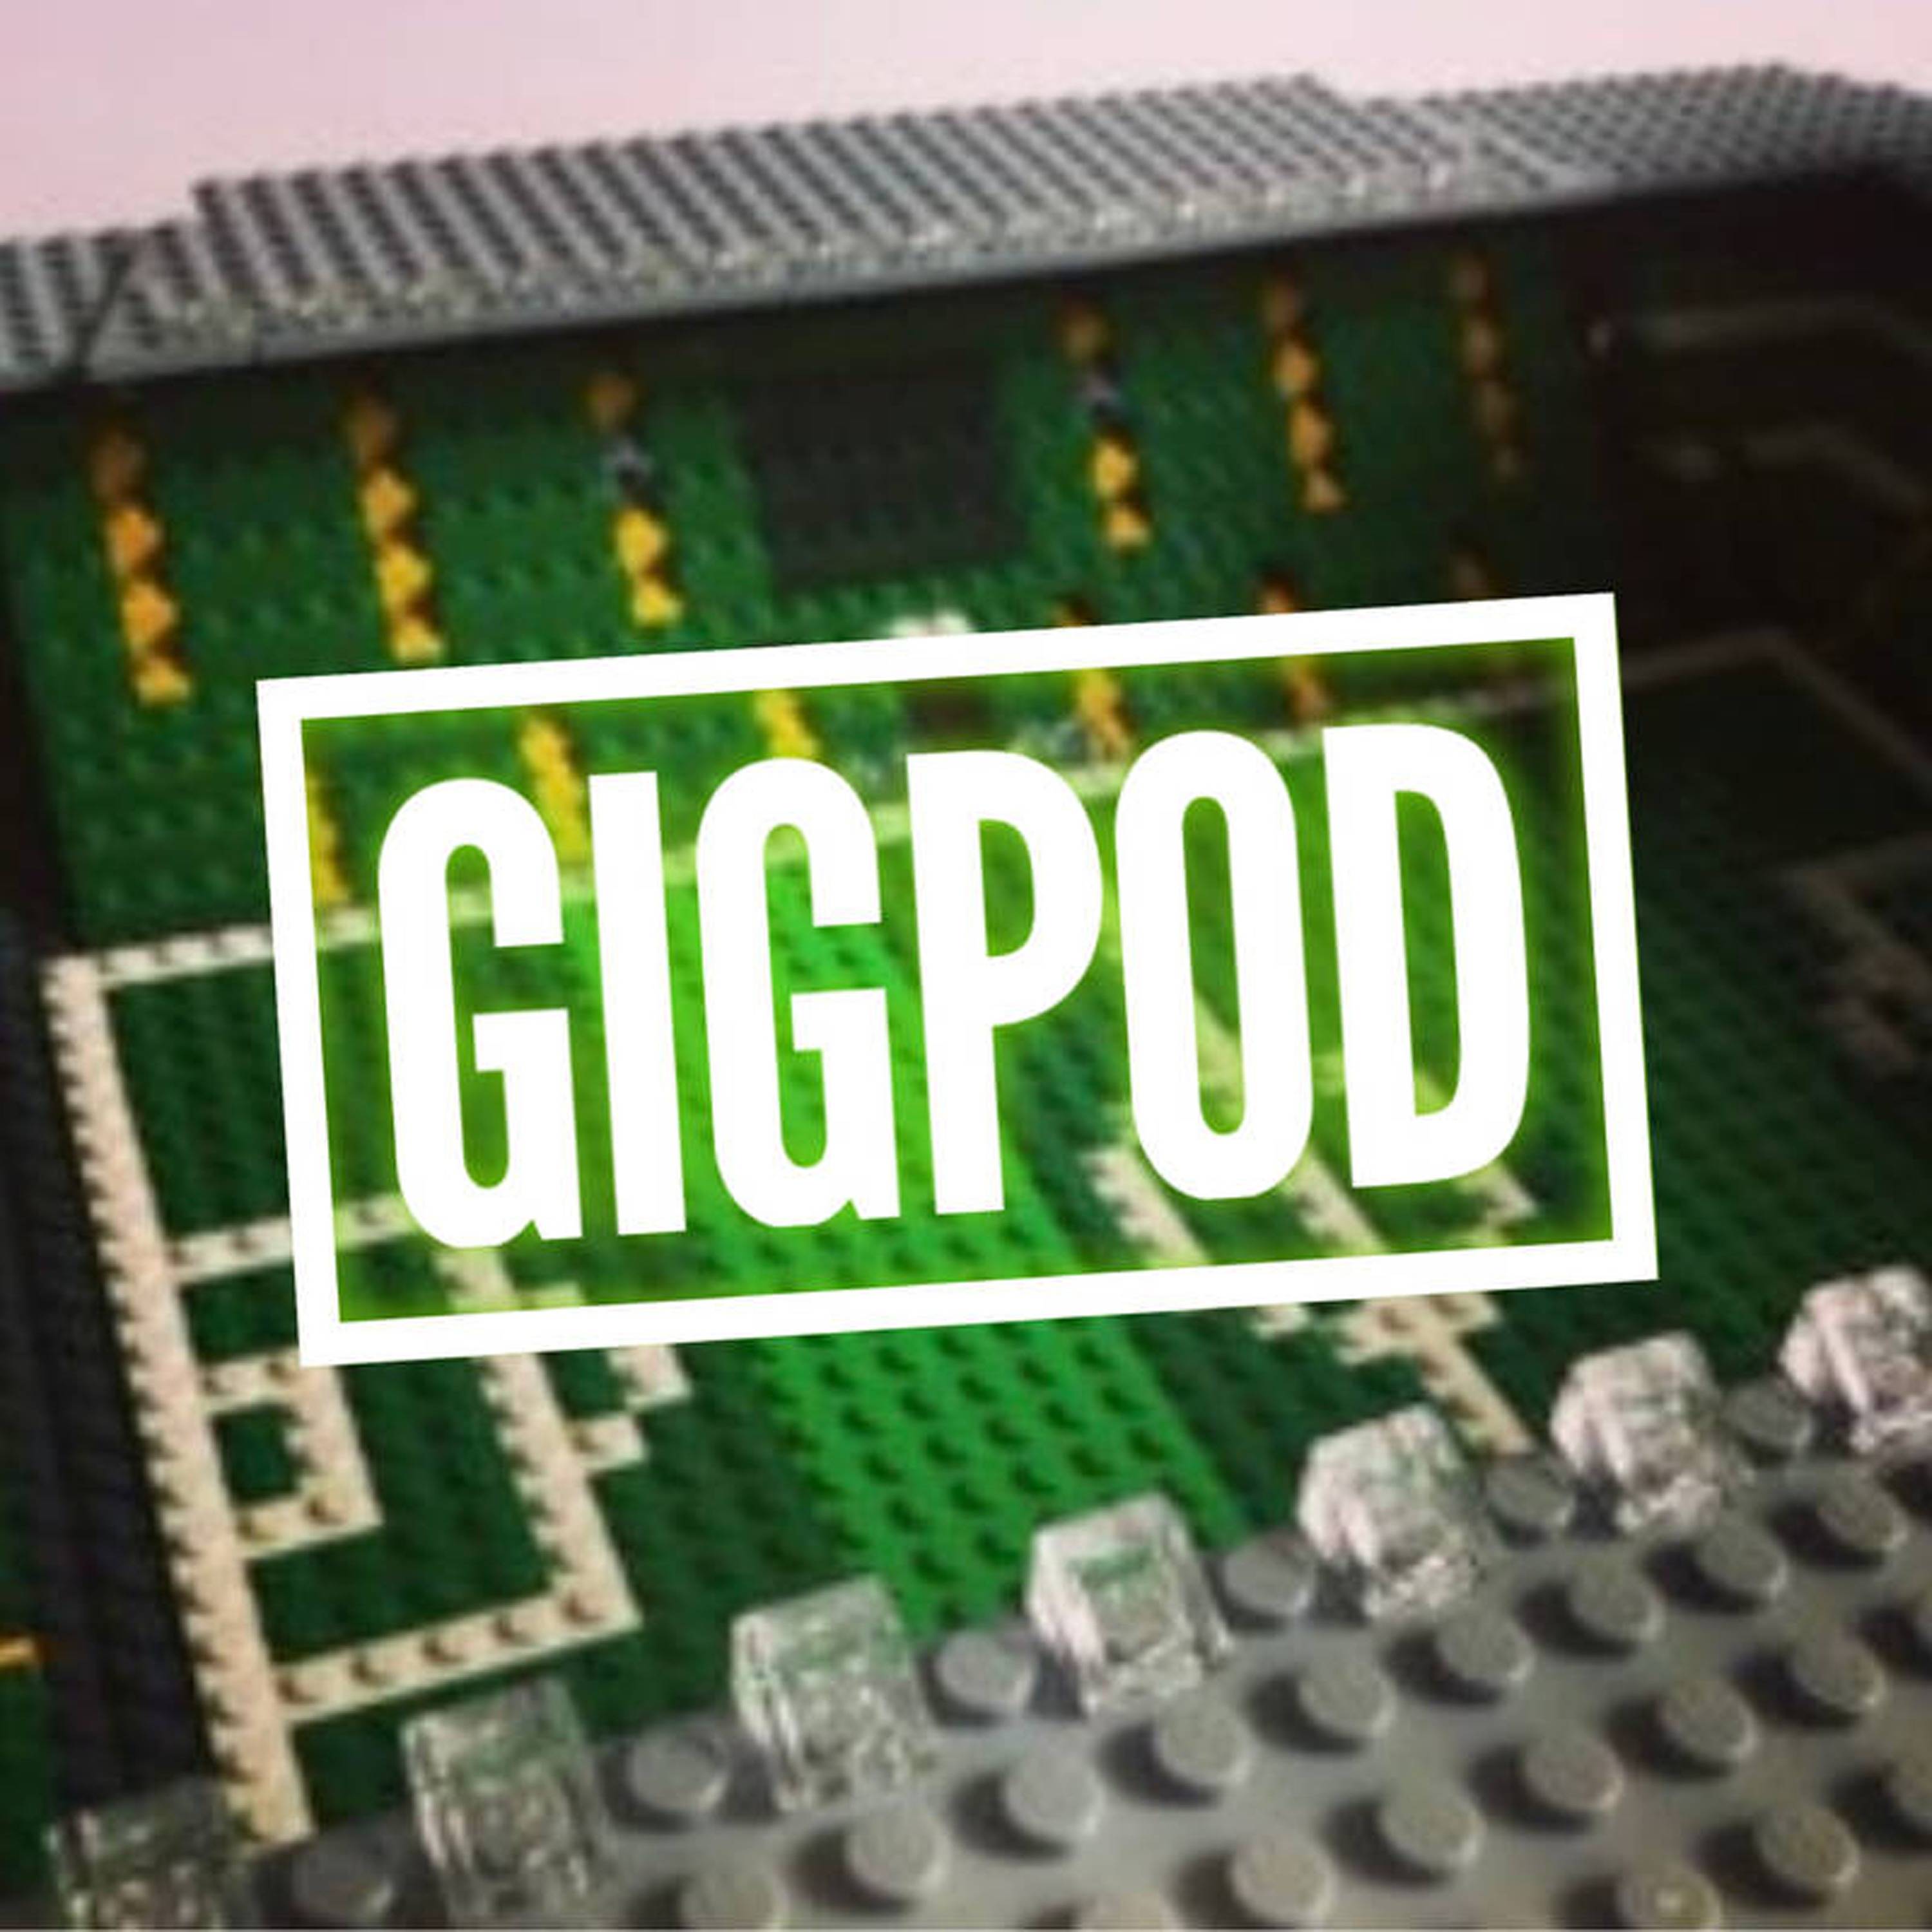 Gigpod Ep 197: “I Love the Travel. Dingwall Then to Madrid. Brilliant.”